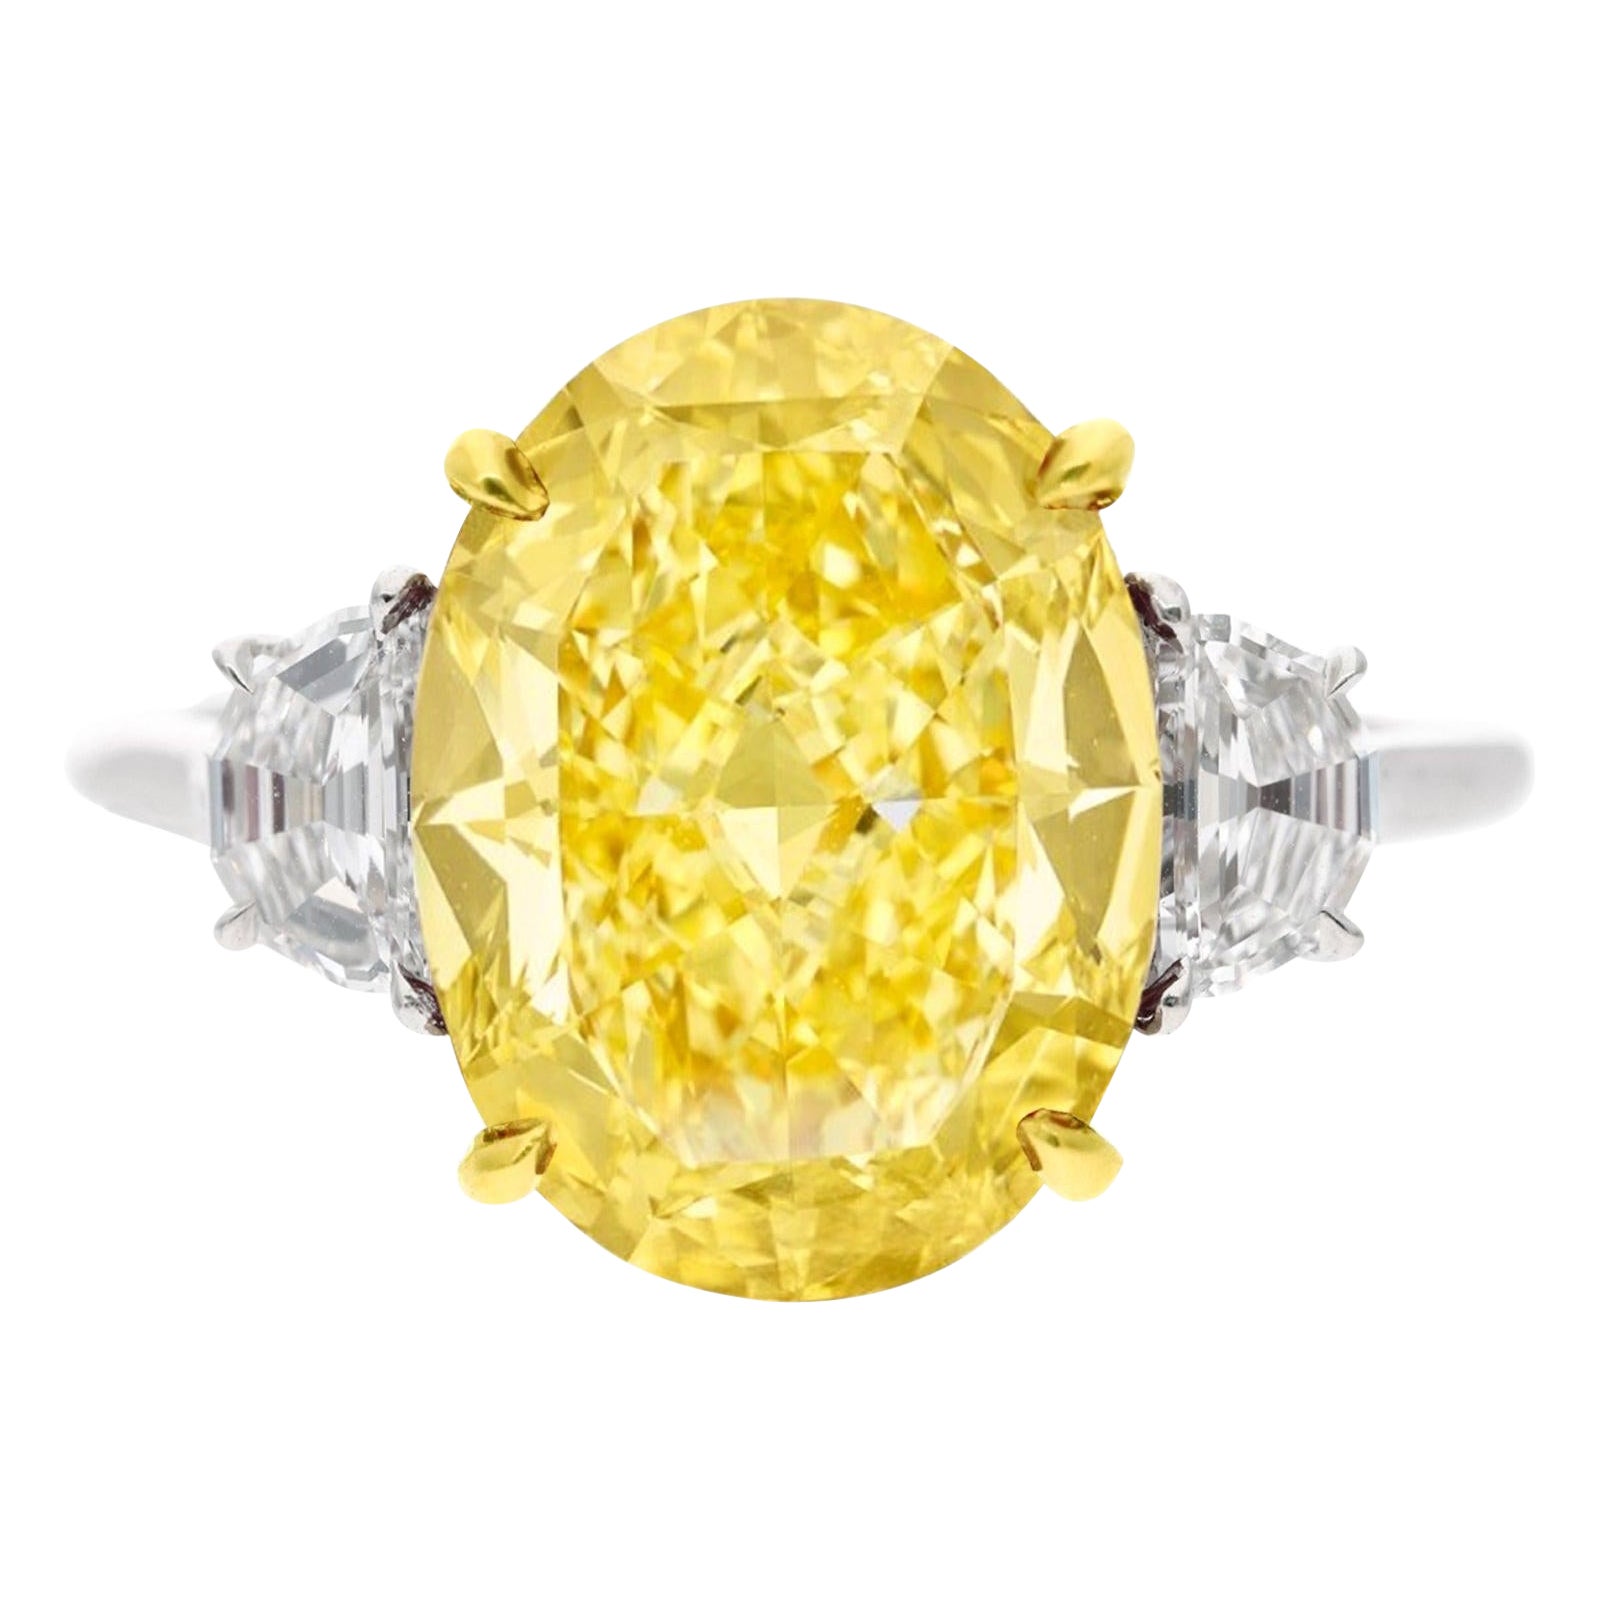 GIA Certified 5 Carat Fancy Yellow Oval Cut Platinum Ring flawless clarity